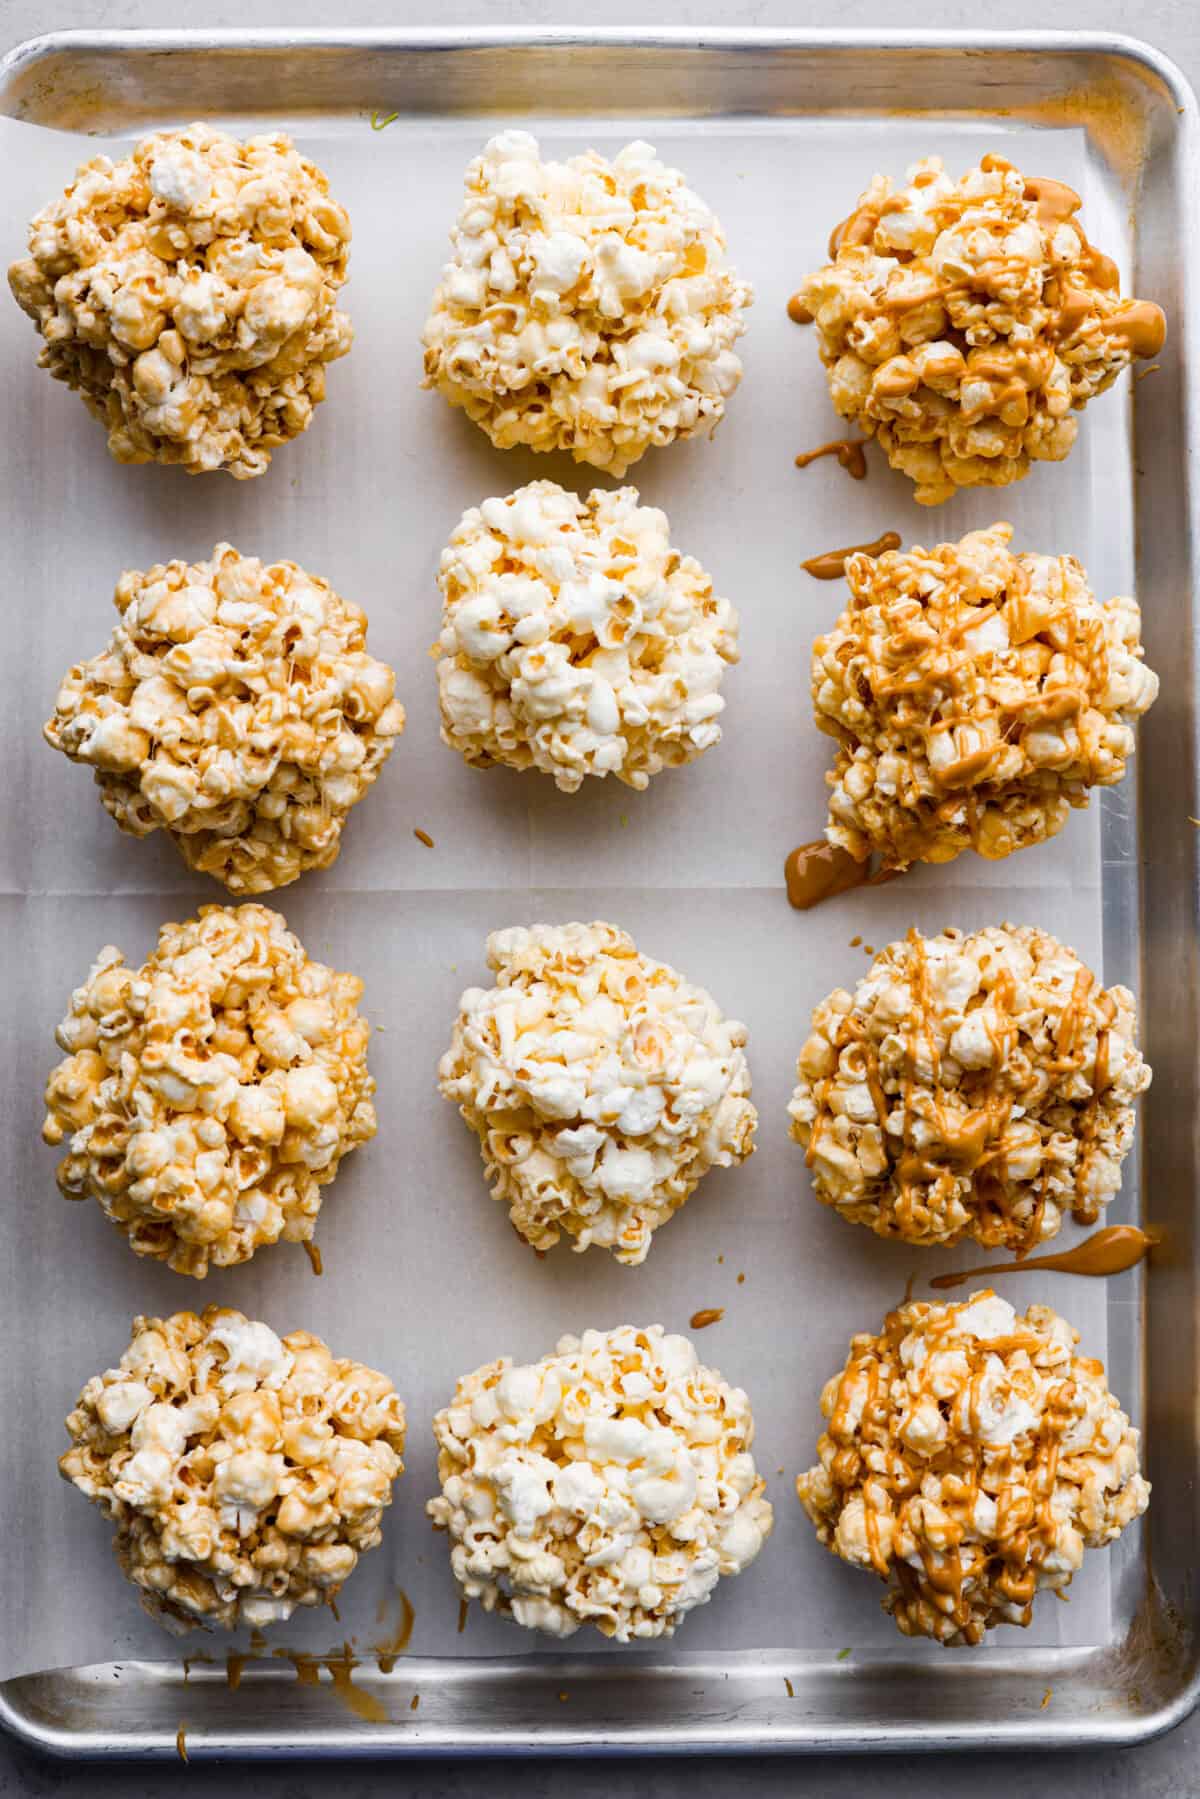 Top-down view of the popcorn balls on a parchment paper-lined baking sheet.